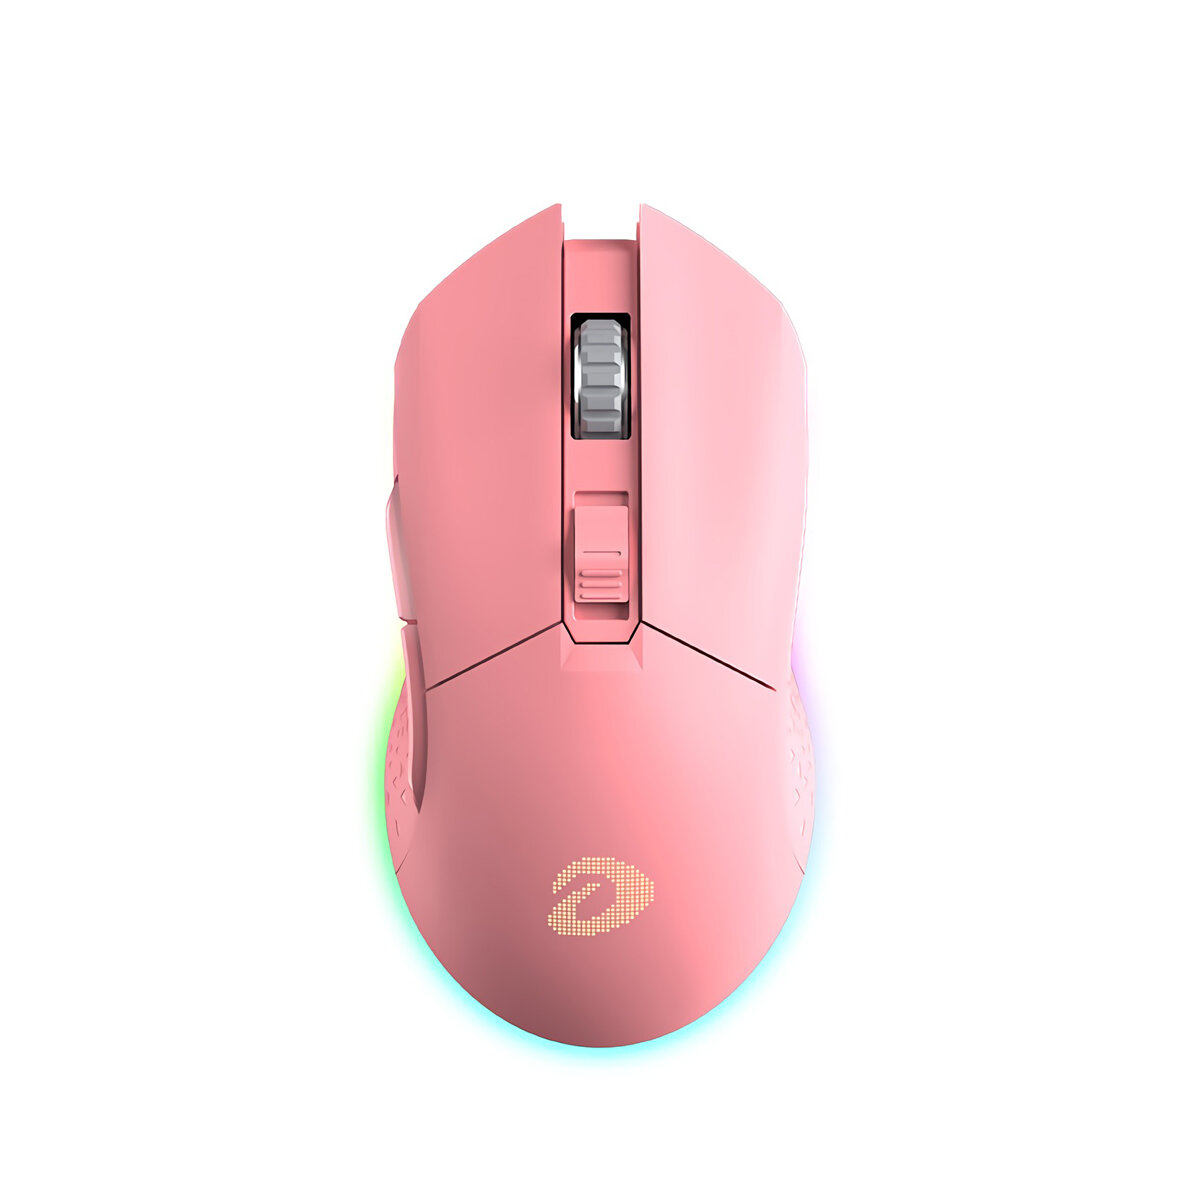 DAREU EM901 Dual Mode Mouse RGB 2.4GHz Wireless Wired Gaming Mouse Built-in 930mAh Recharging Batter